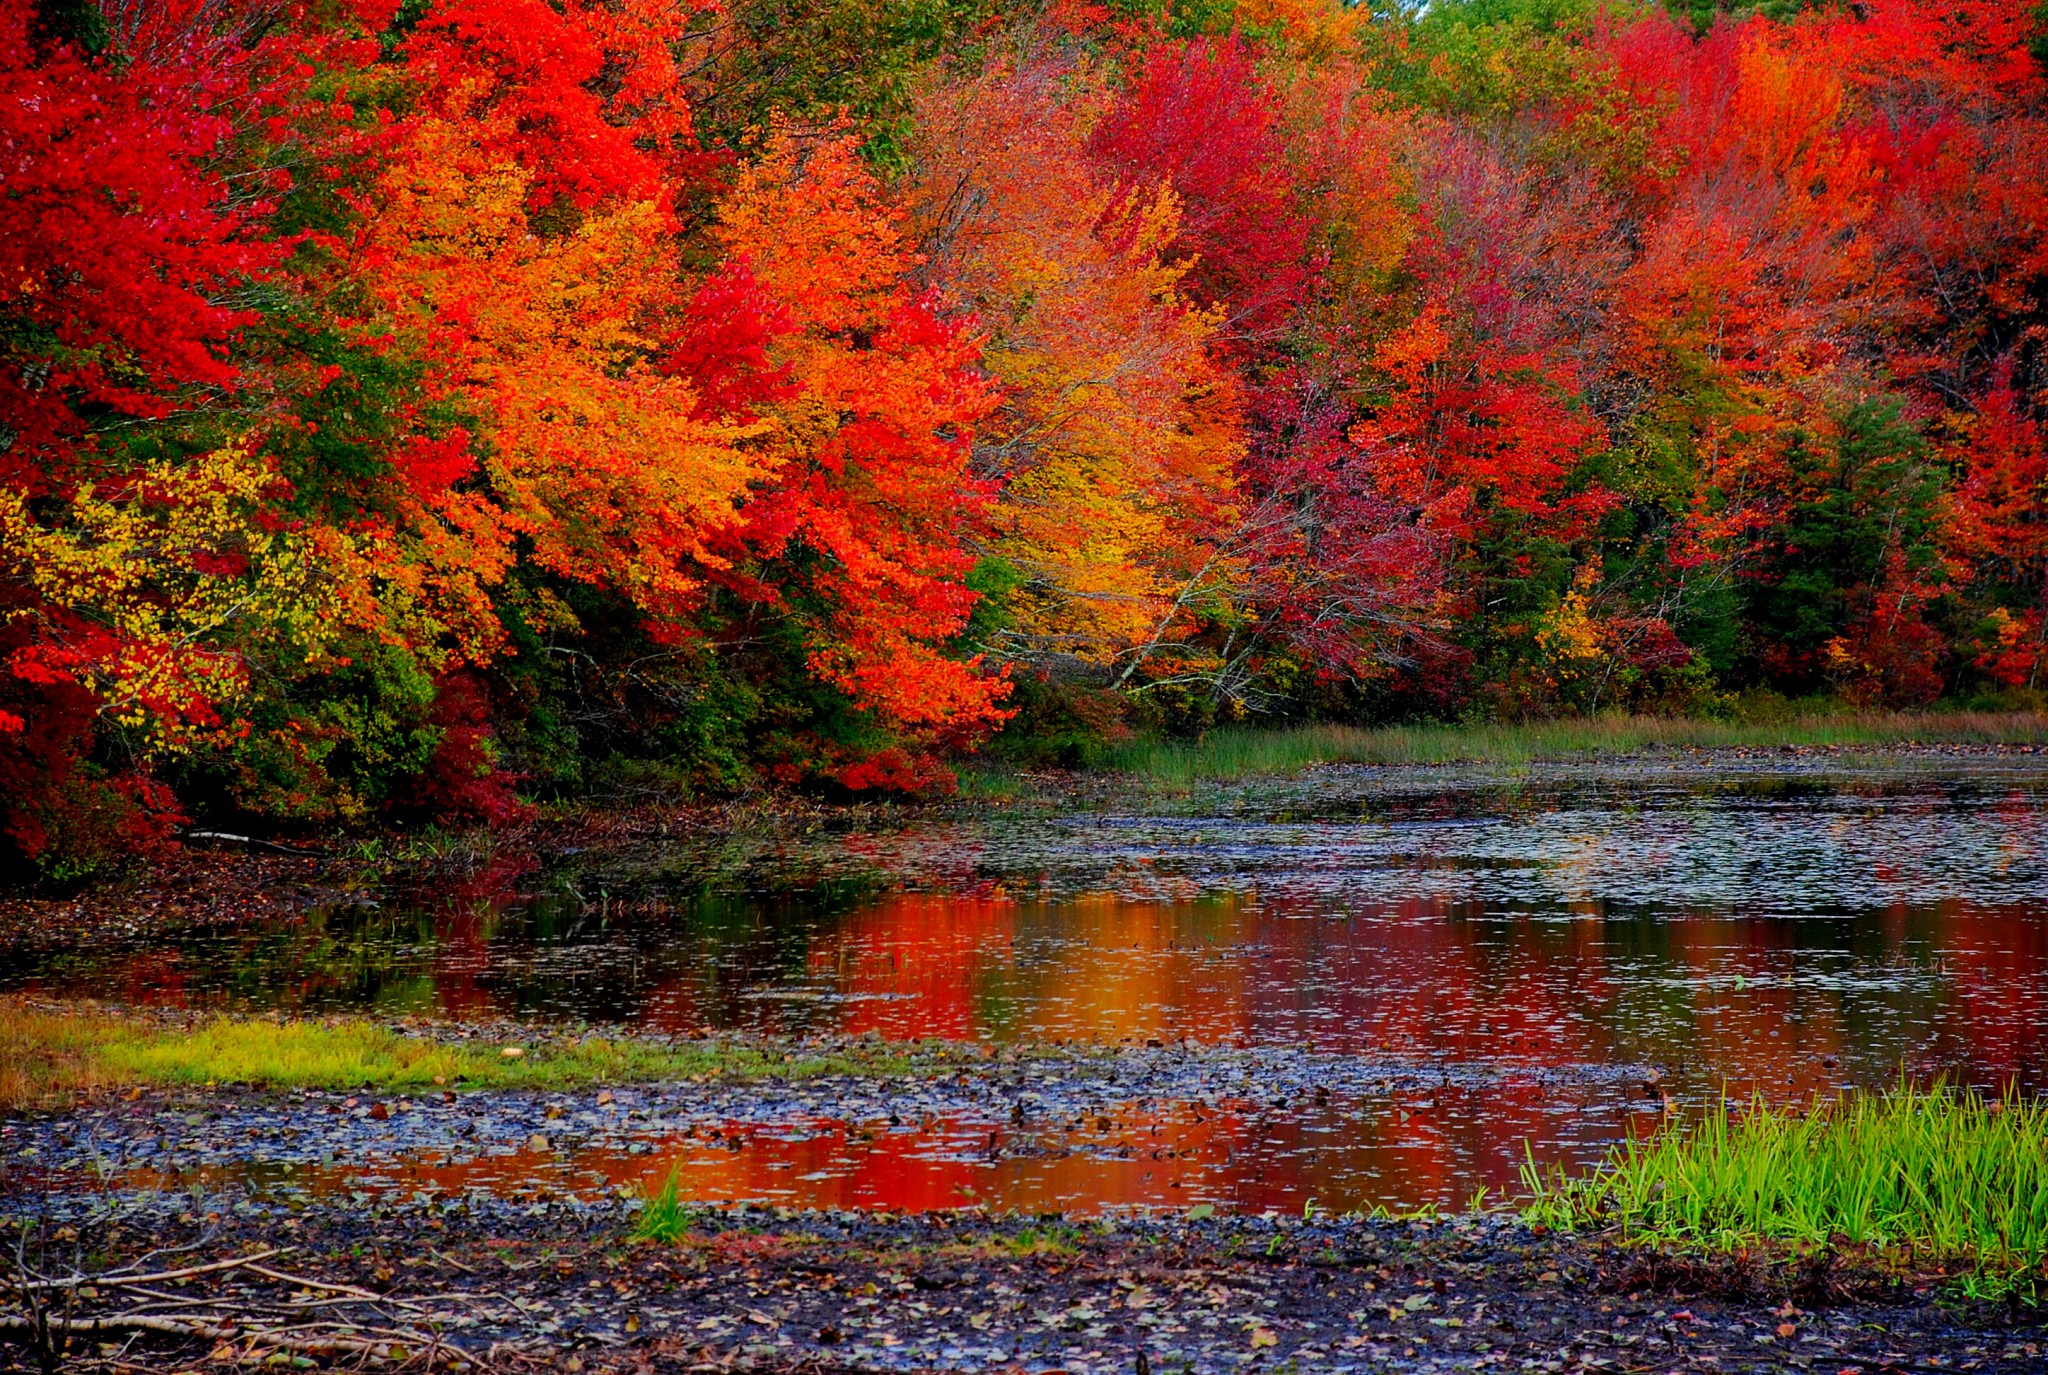 It's a GORGEOUS day! GFT's Top 10 Spots To View Fall Foliage In NJ ...